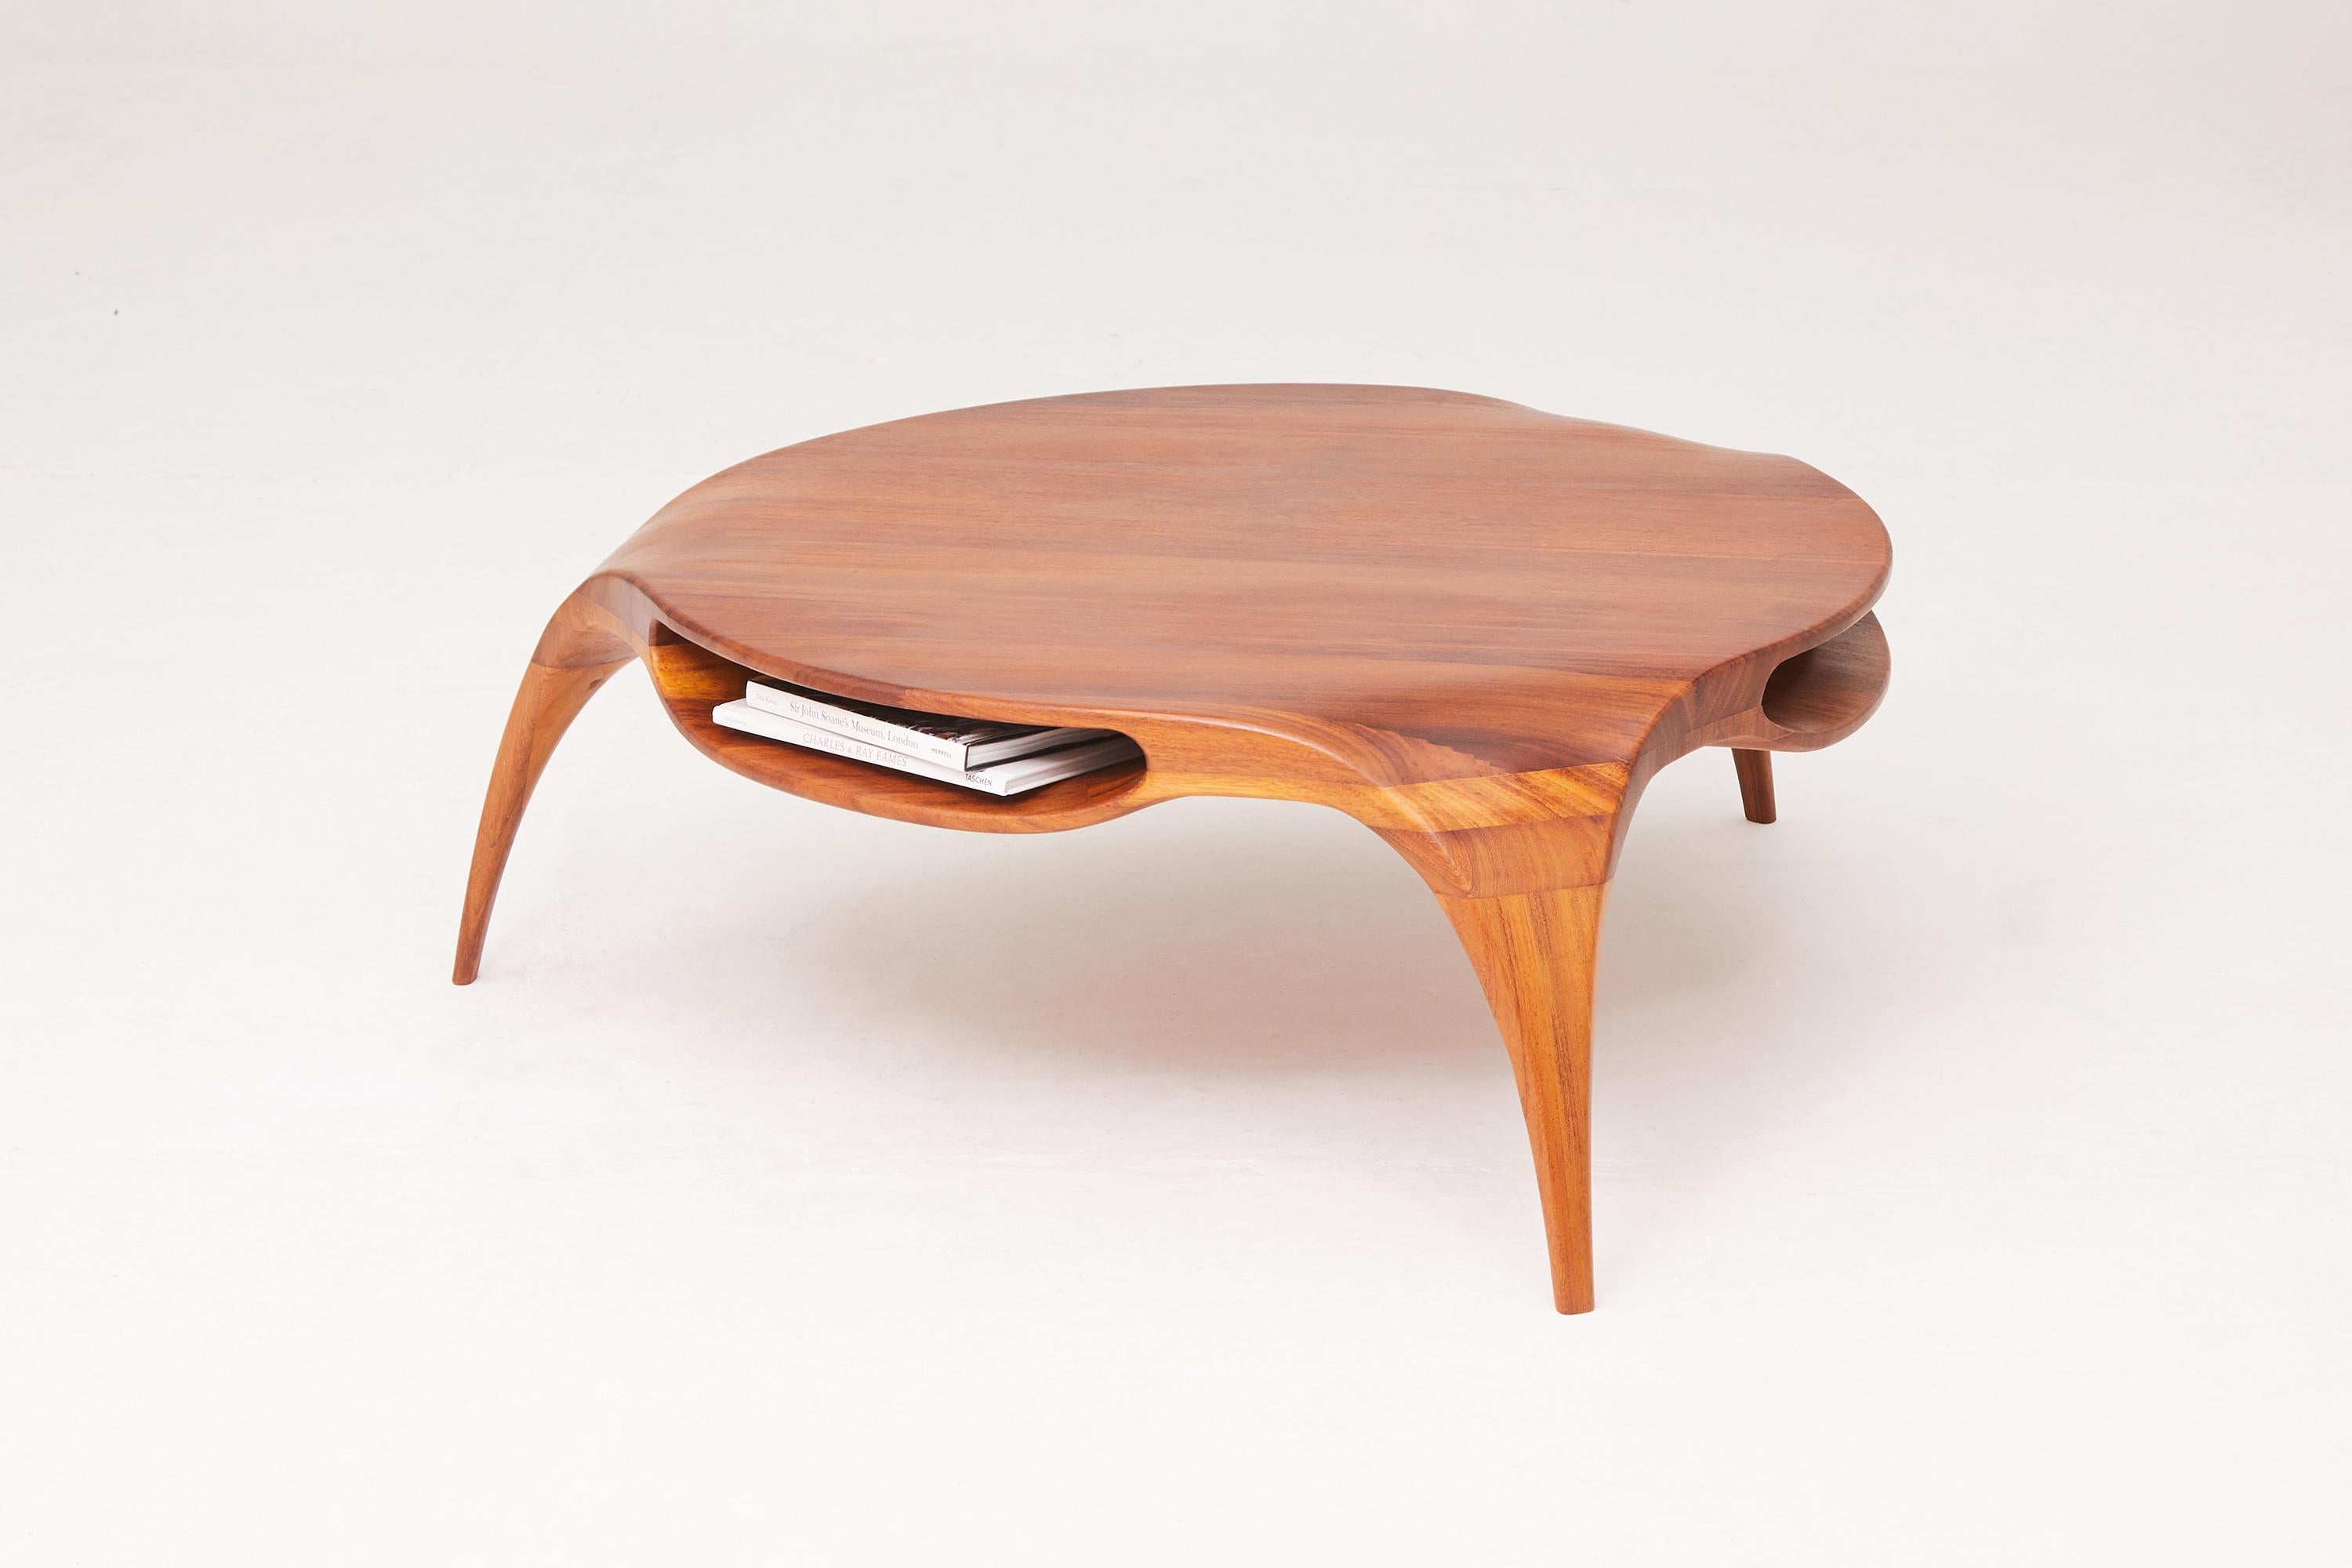 Iroko Wood Sankao coffee table by Henka Lab
Limited Edition
Dimensions: H 42 x w 120 x l 120 cm
Materials: Solid Iroko wood, oil, natural wax finish

Avalaible in Ash wood, charcoal color.

Series limited to 250 signed and numbered copies.